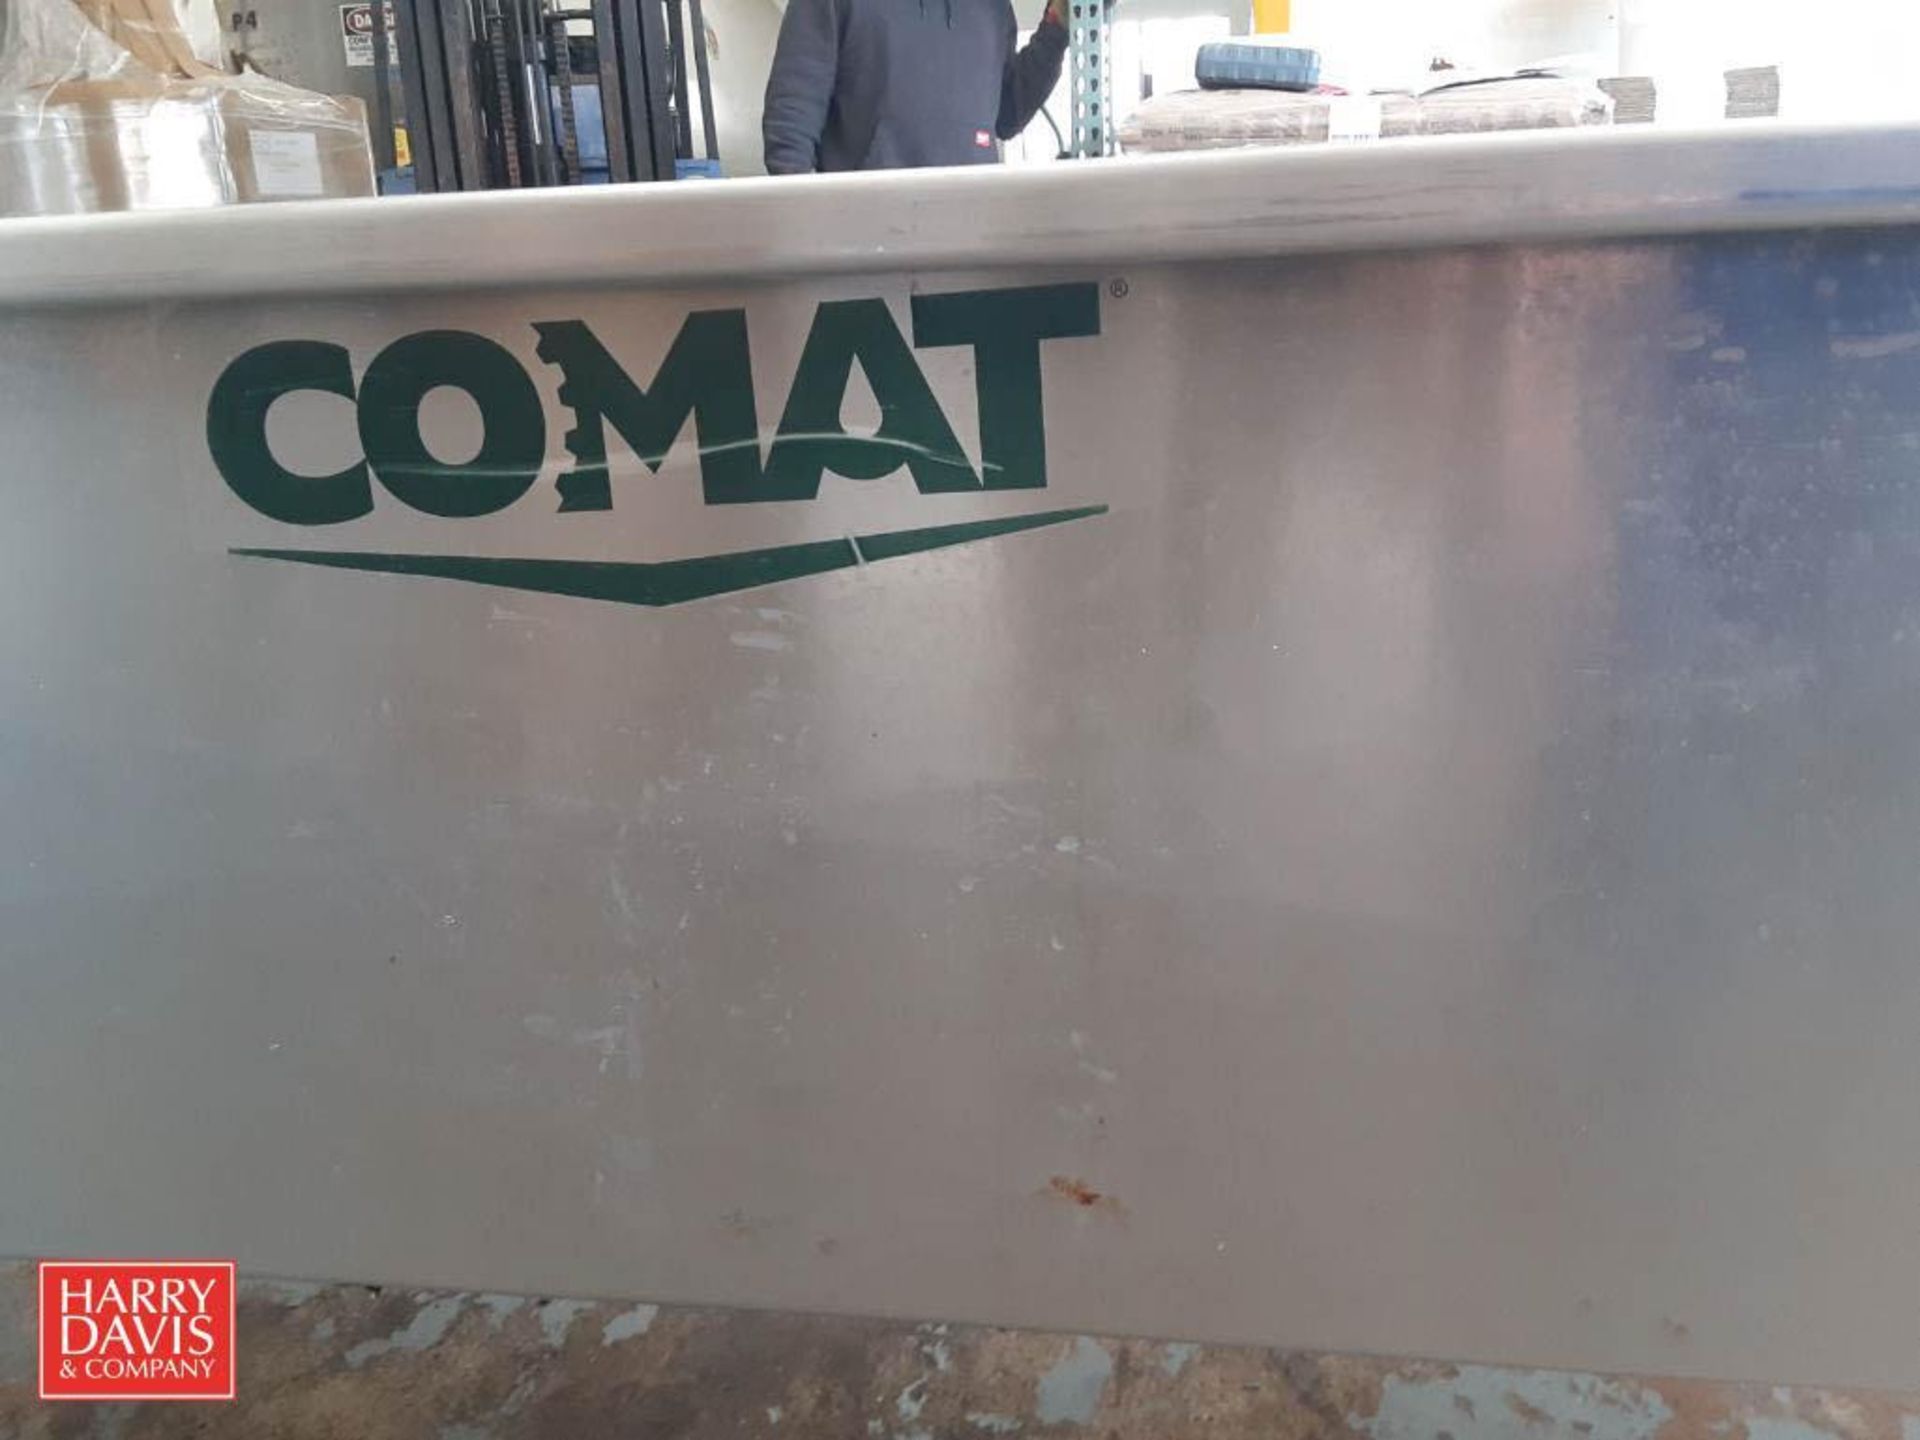 Comat 200 Gallon S/S Portable Cheese Vat with 2" Manual Butterfly Drain Valve: Mounted on Casters - - Image 3 of 3